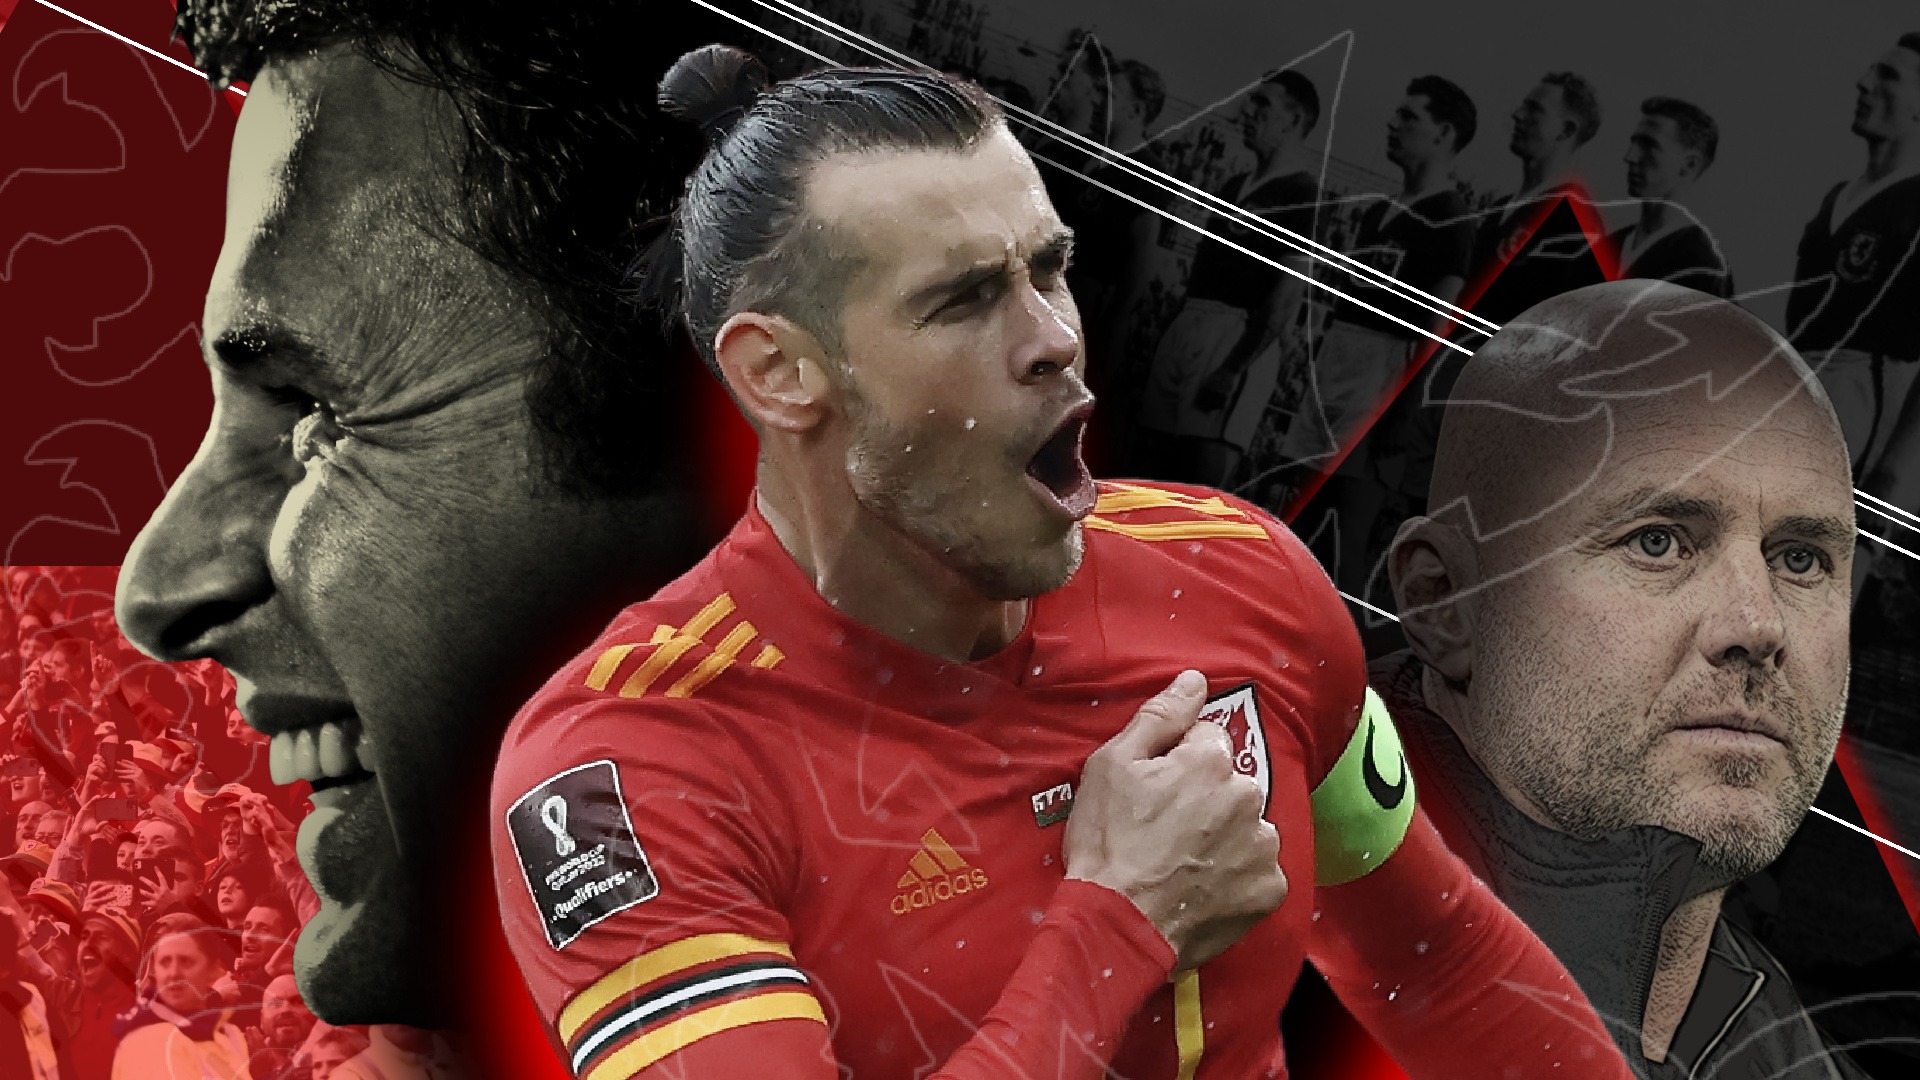 Gareth Bale asks Wales fans to turn up in force for Cyprus clash